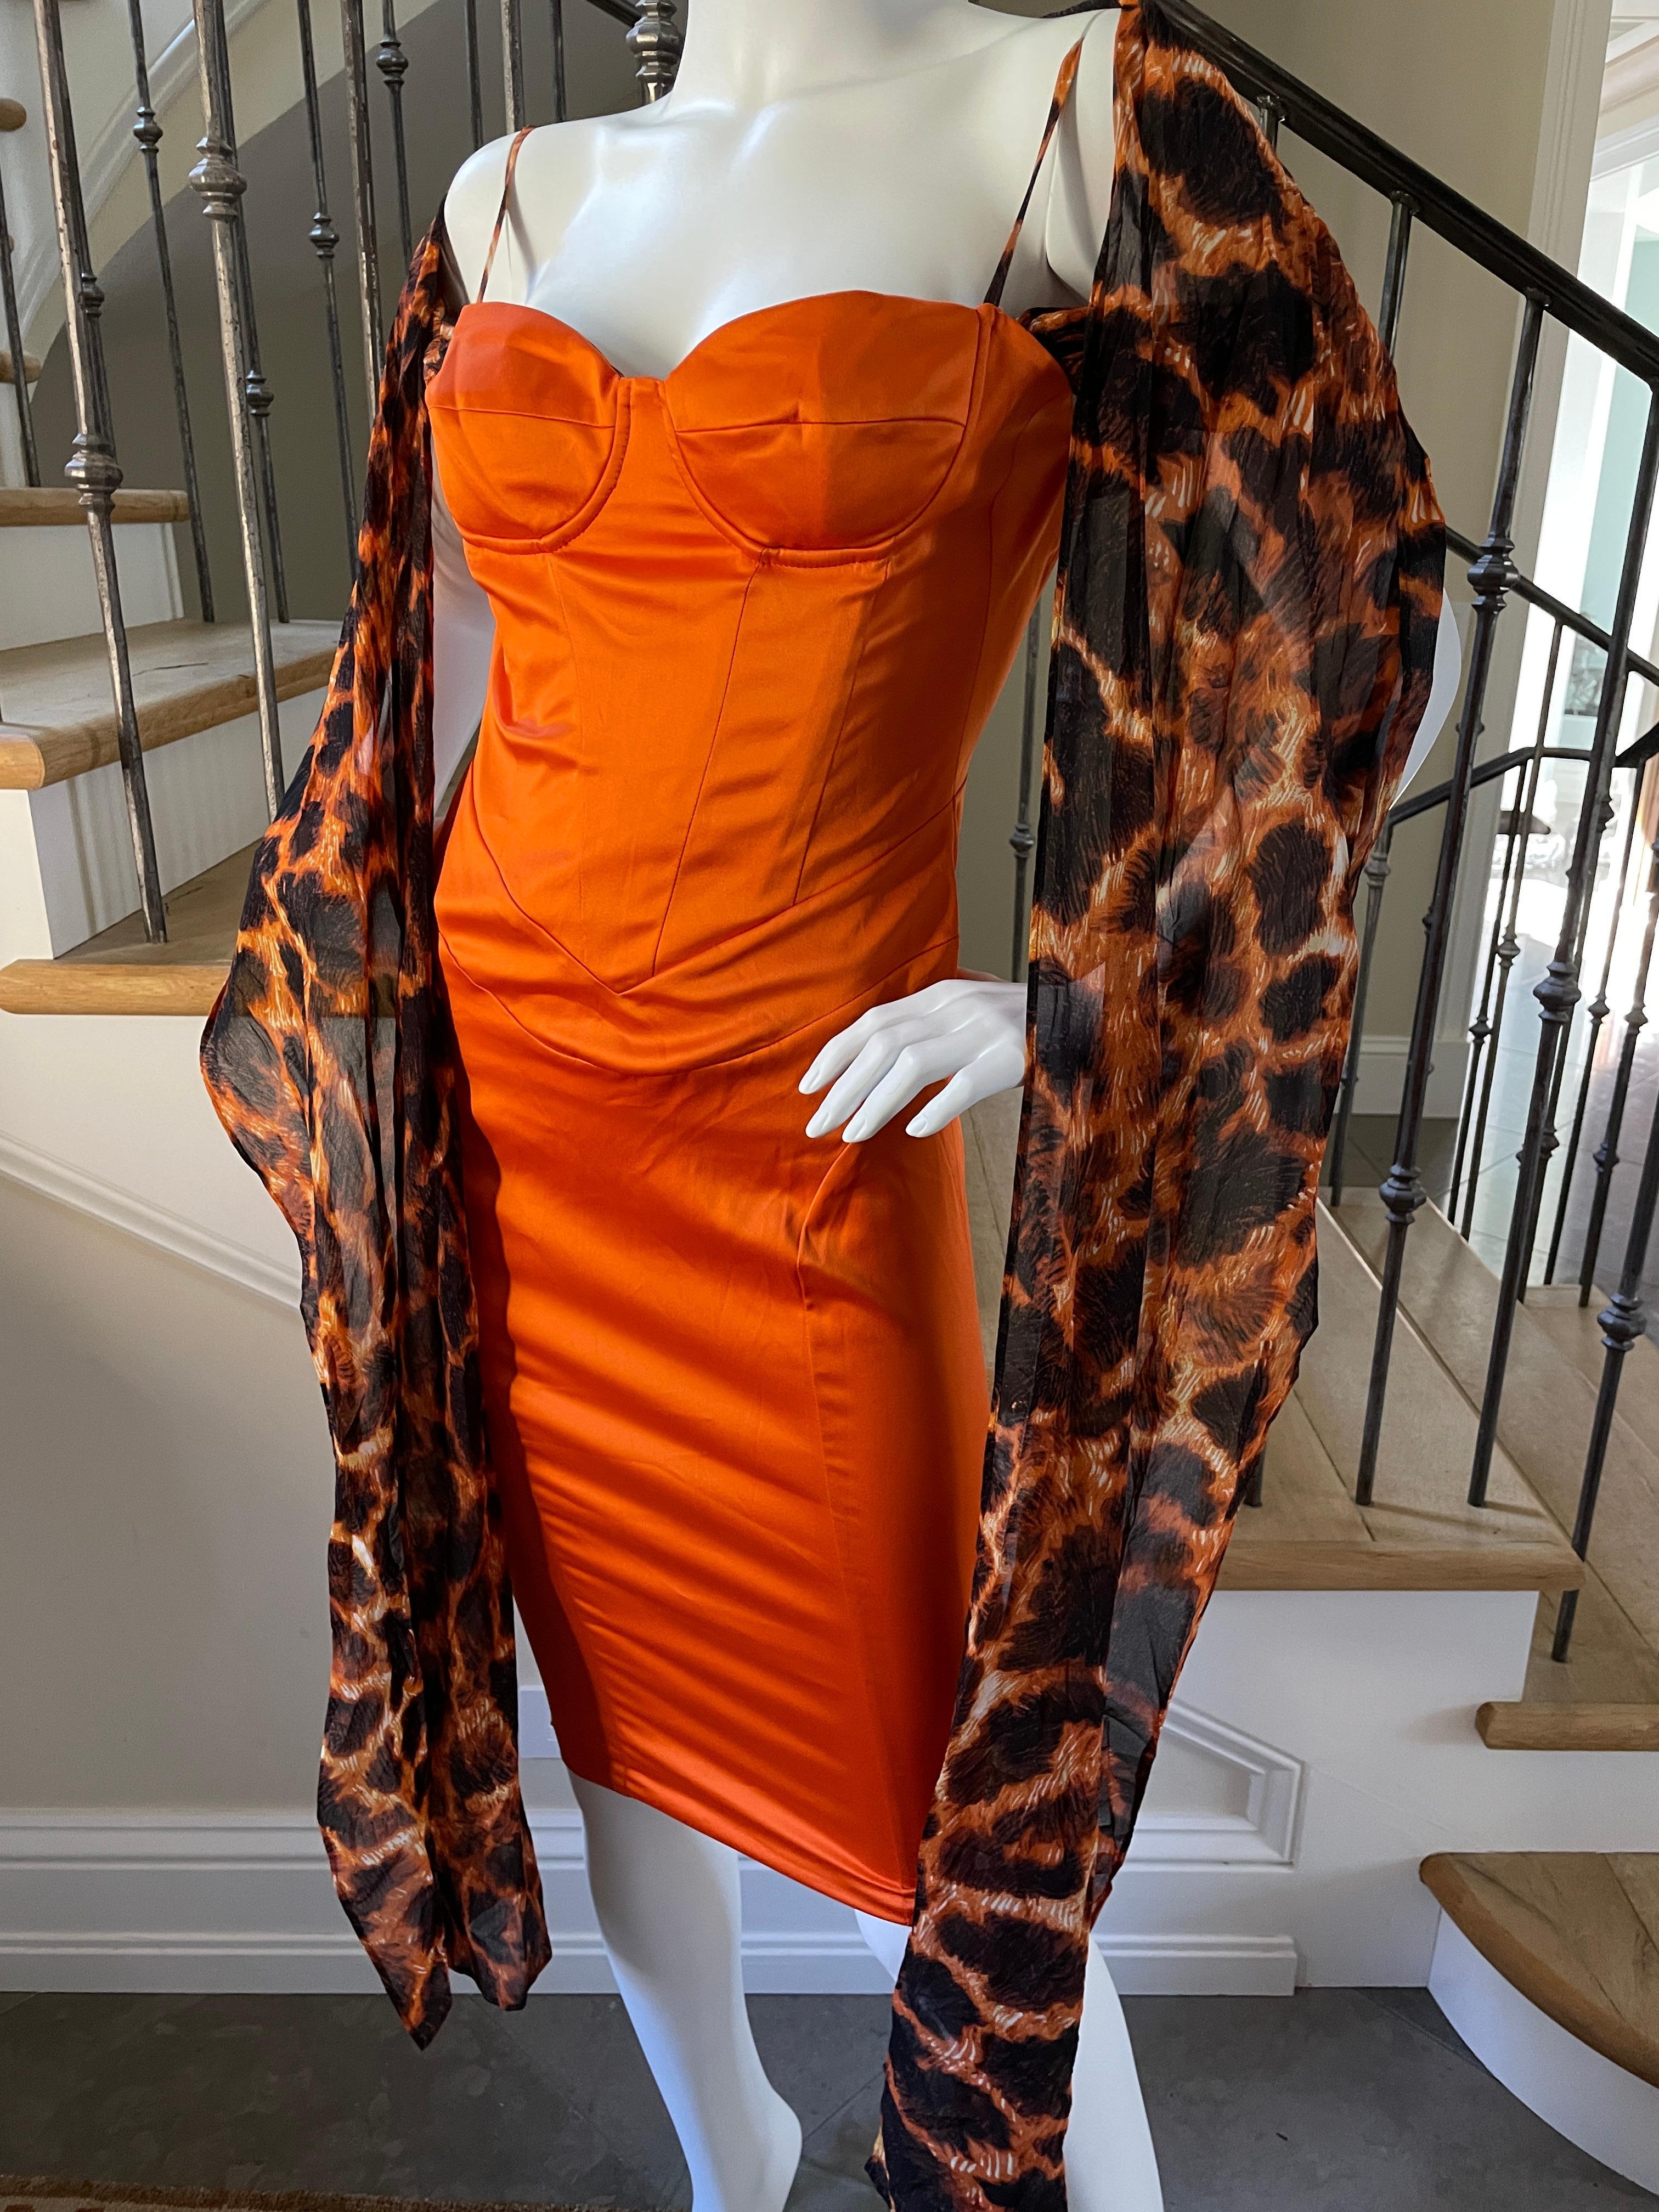 Just Cavalli Vintage Orange Corset Dress with Attached Animal Print Scarves In Excellent Condition For Sale In Cloverdale, CA